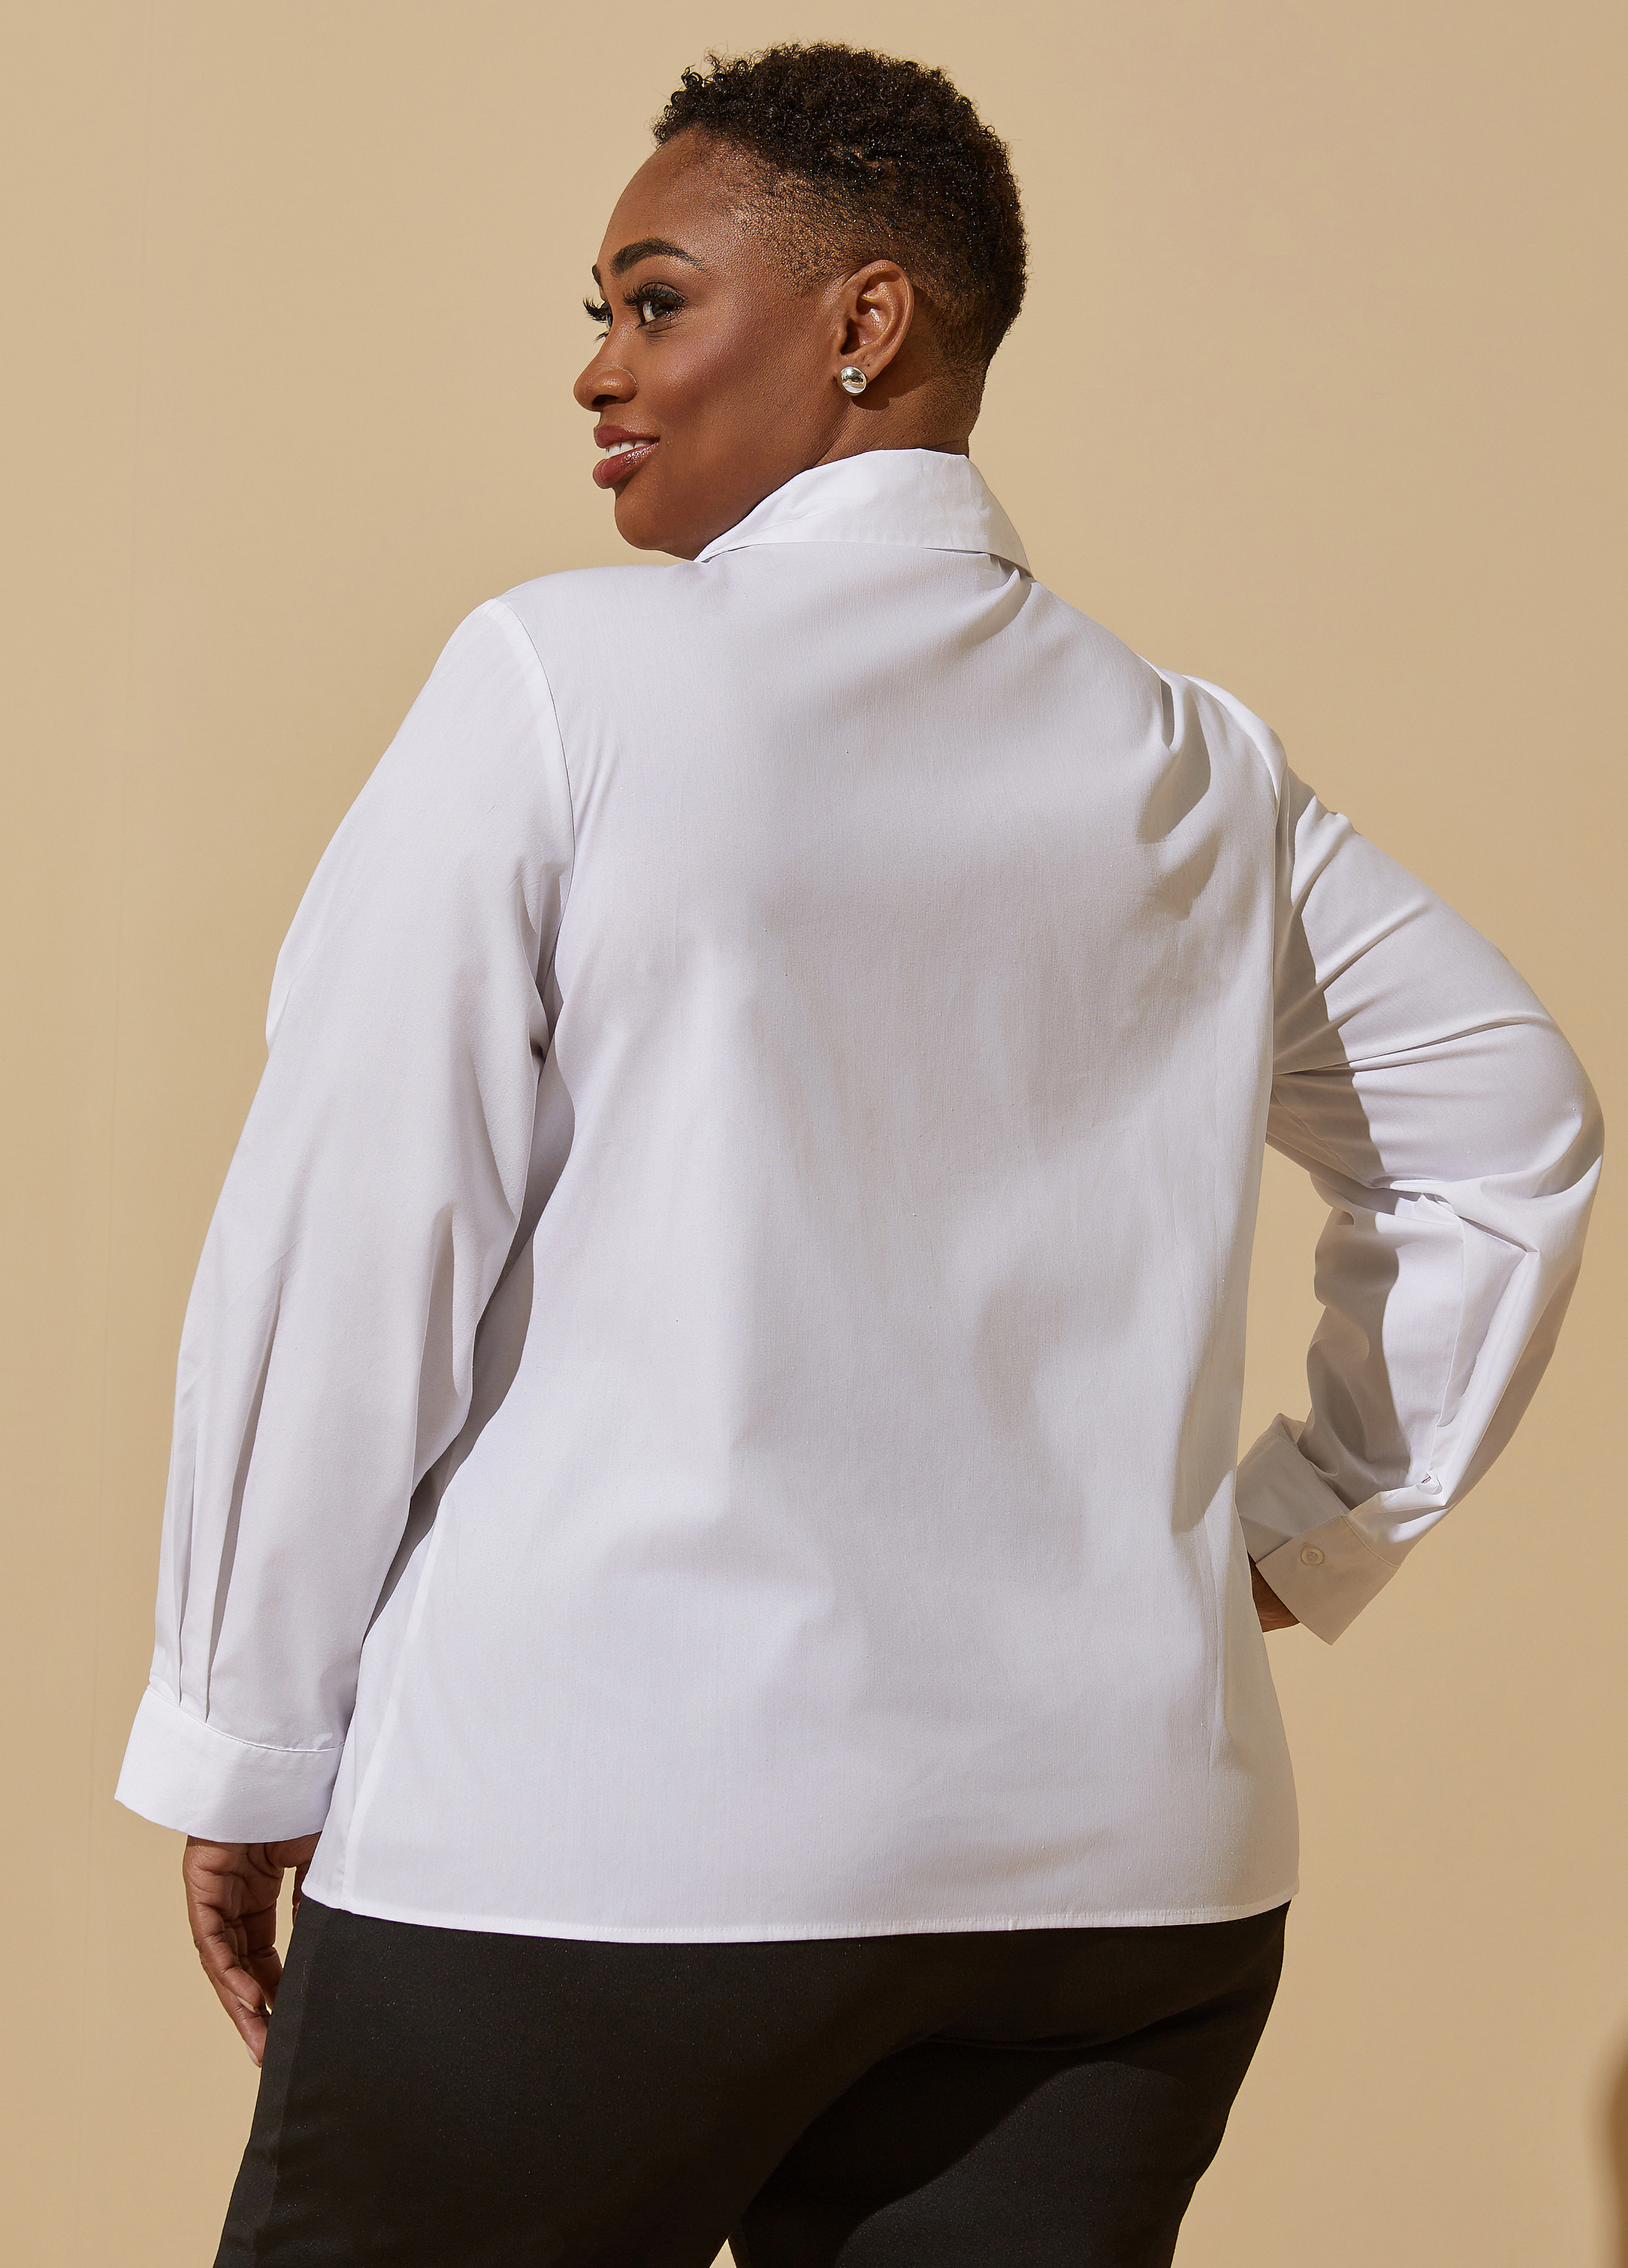 Plus Size crystal collared shirts plus size shirt plus size work tops